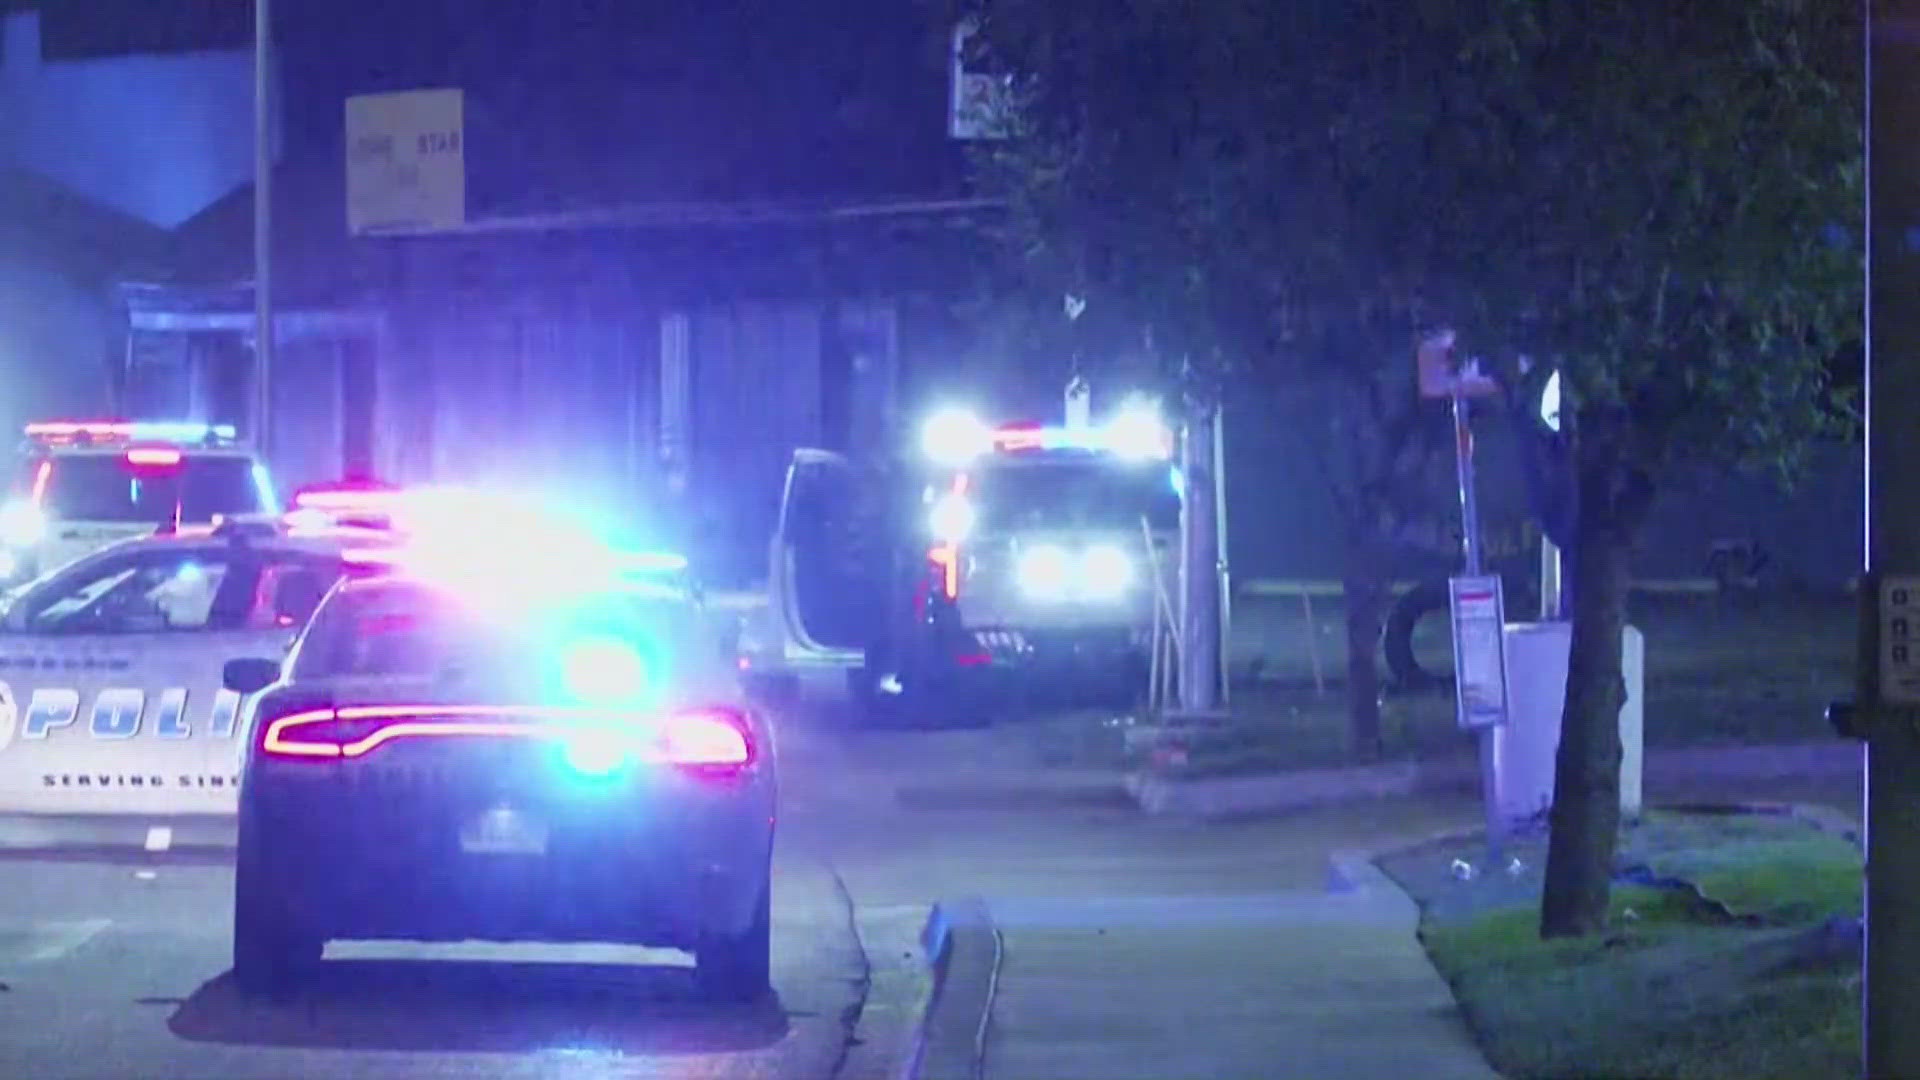 A Dallas police officer shot and killed a suspect after a struggle overnight in the 2900 block of South Lancaster Road, police said.